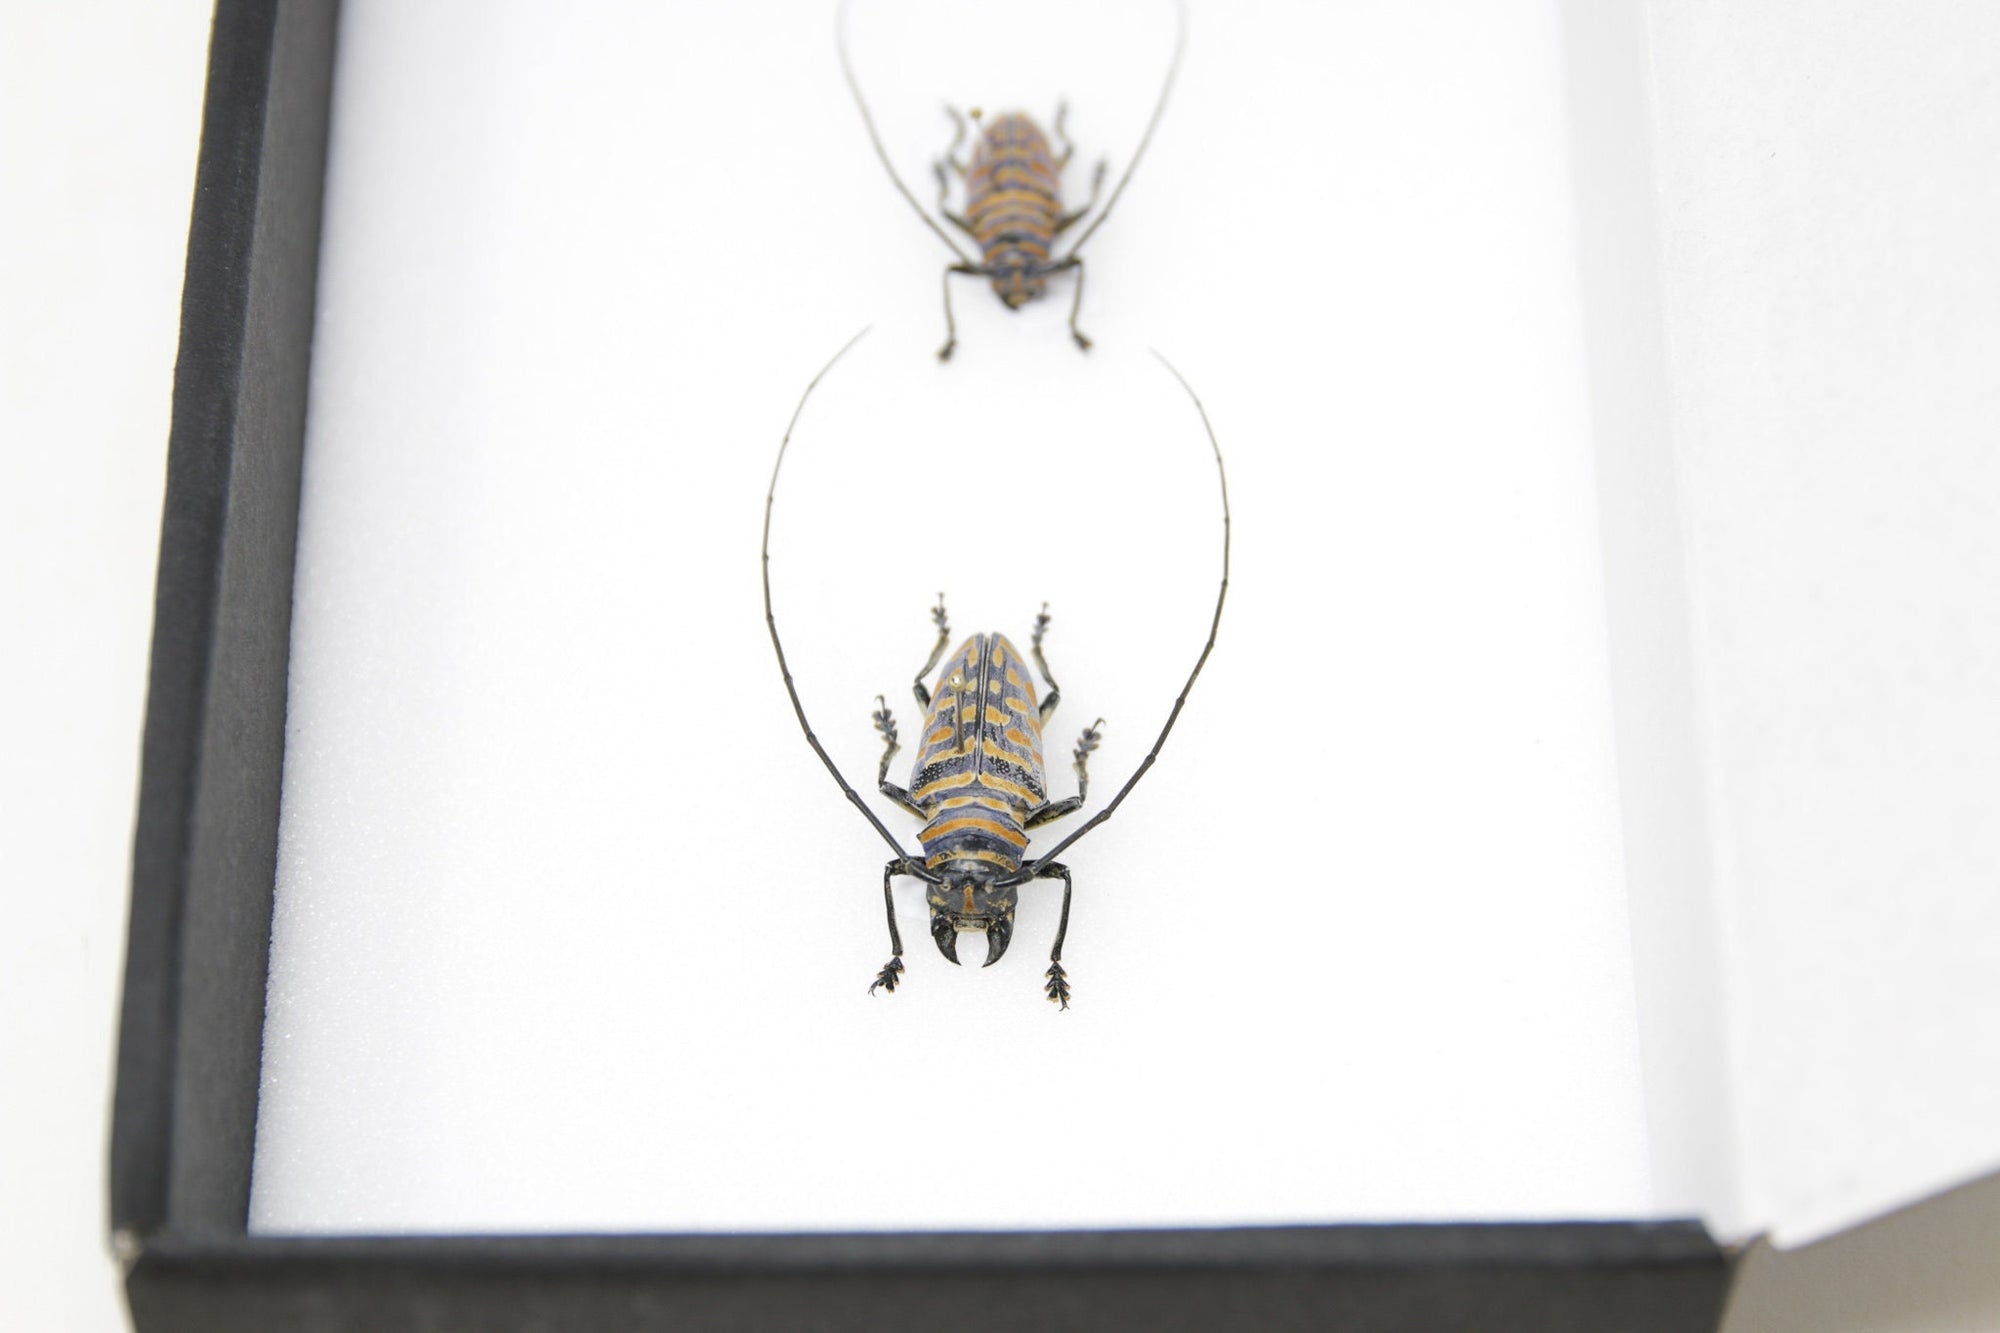 A Mounted Beetle Specimen with Scientific Collection Data, A1 Quality, Entomology, Real Insect Specimens SKU#36